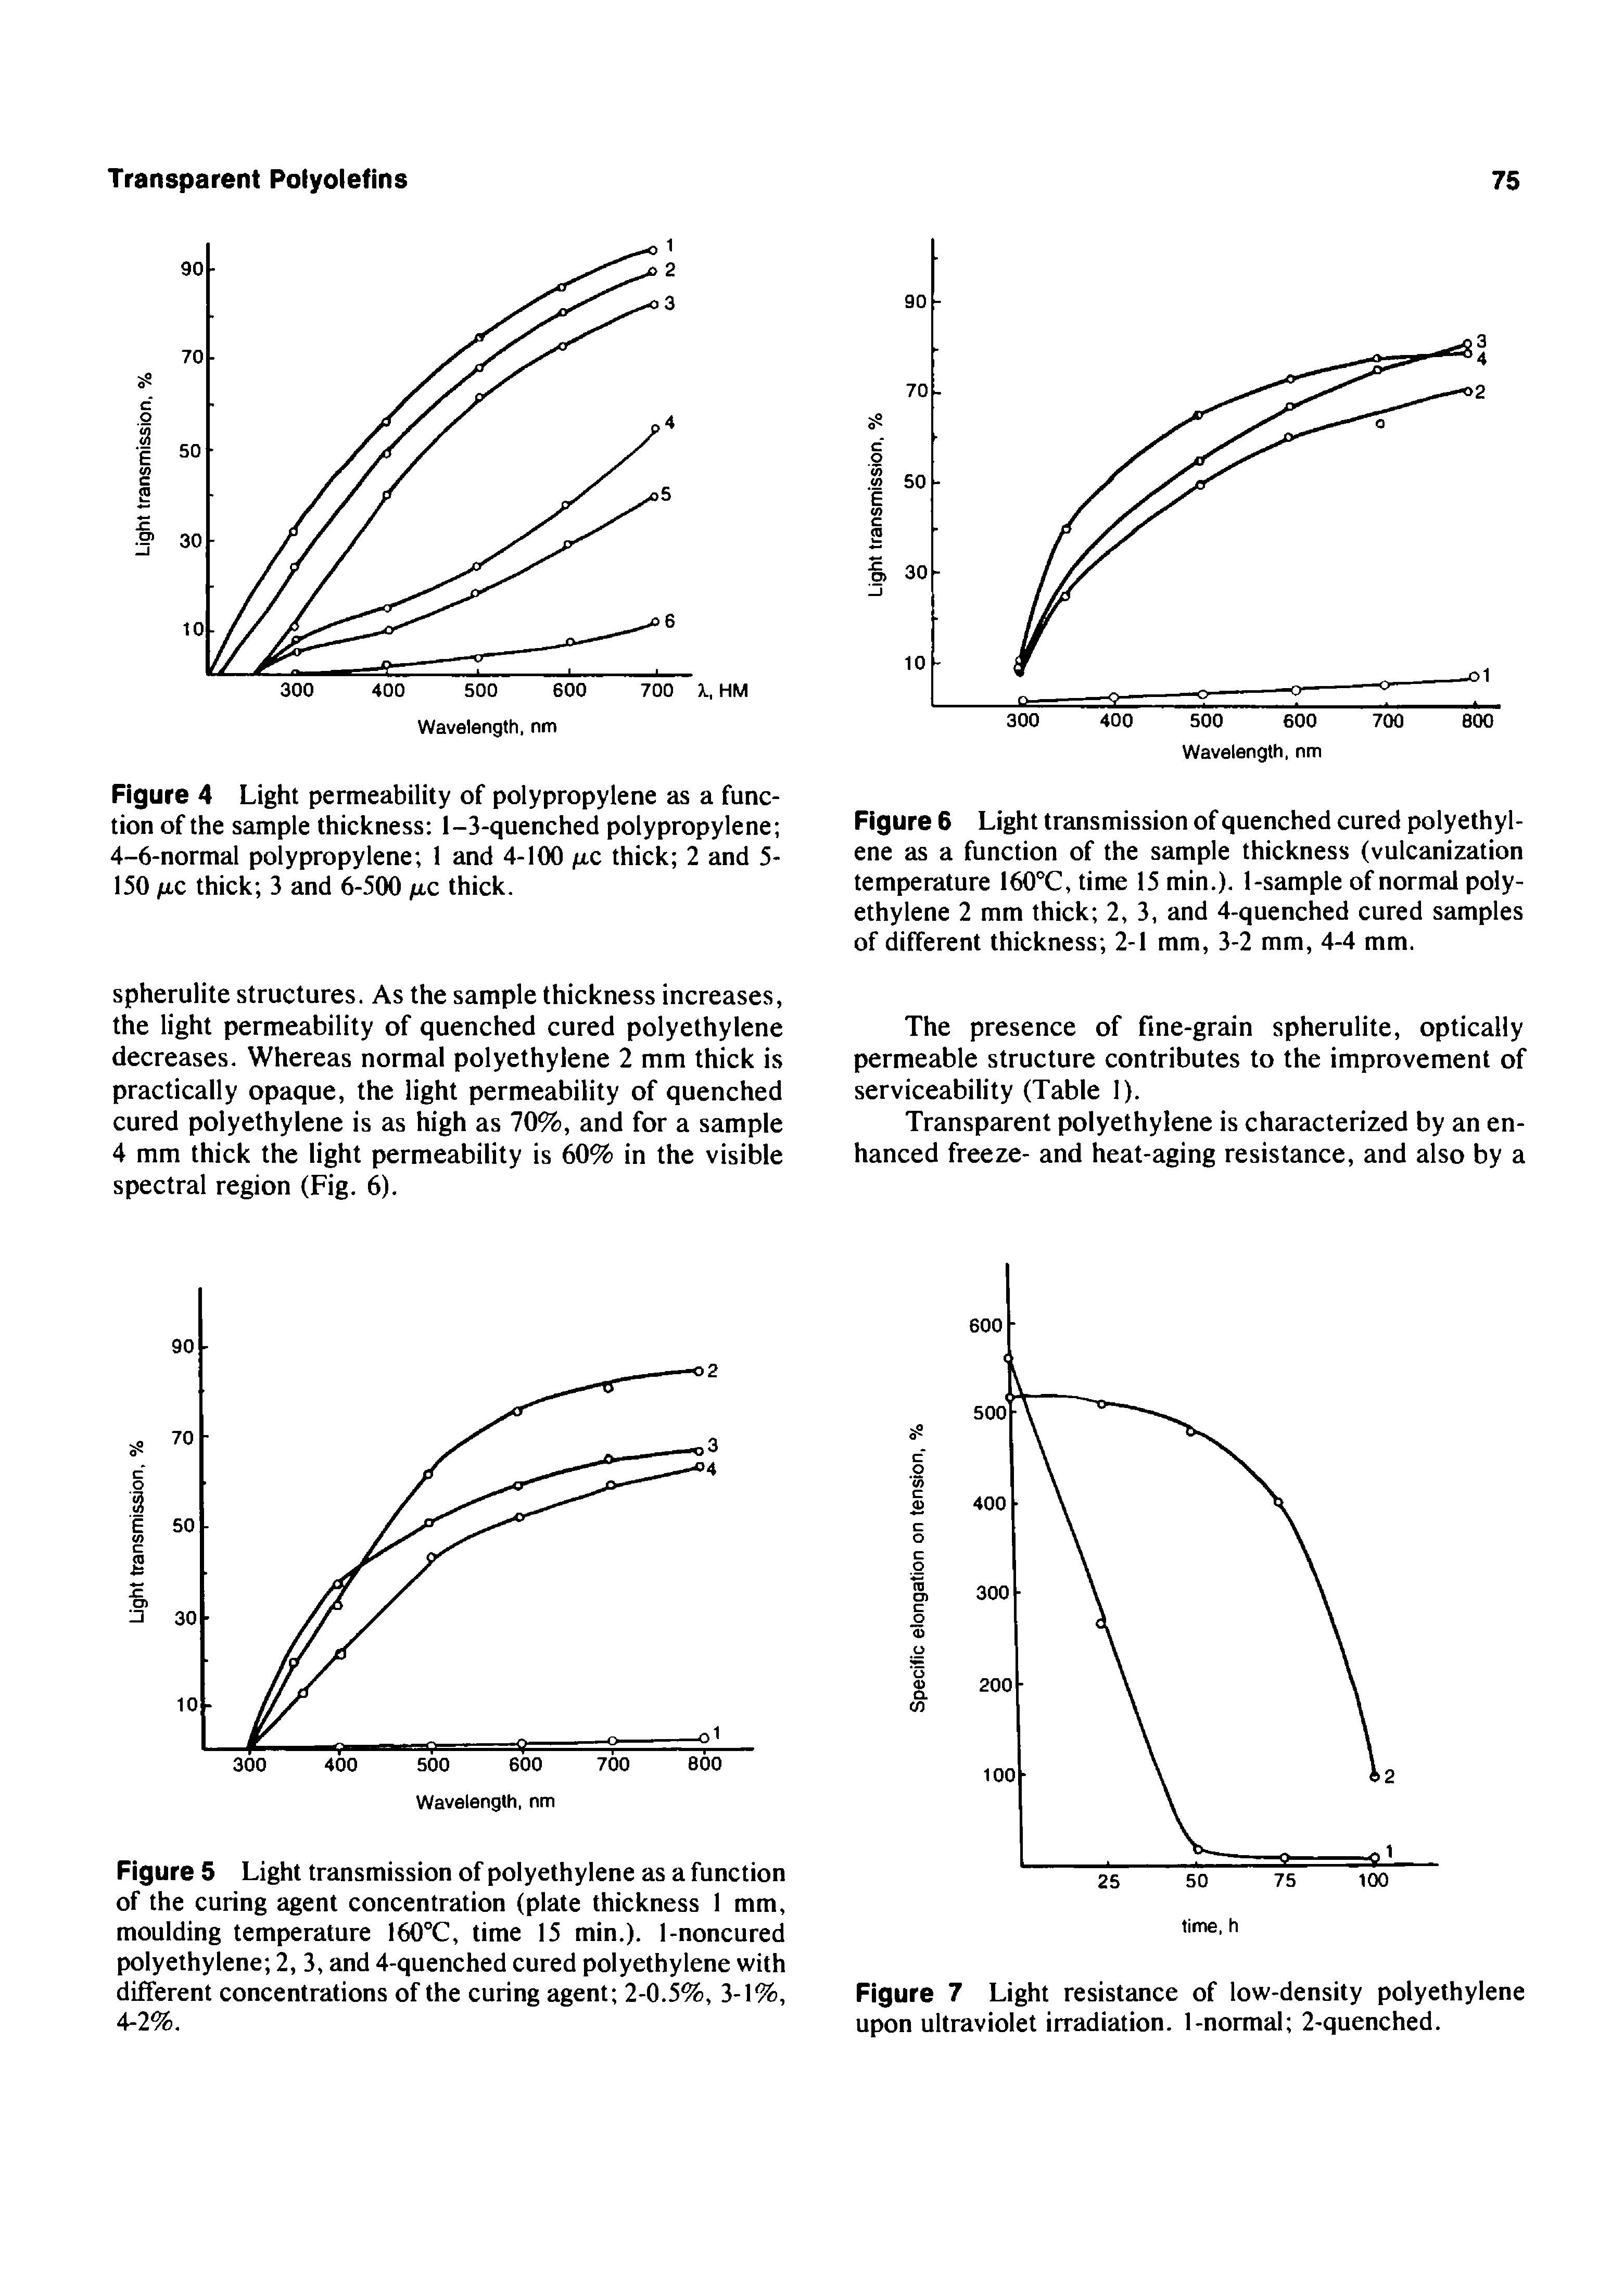 Figure 6 Light transmission of quenched cured polyethylene as a function of the sample thickness (vulcanization temperature 160°C, time 15 min.). 1-sample of normal polyethylene 2 mm thick 2, 3, and 4-quenched cured samples of different thickness 2-1 mm, 3-2 mm, 4-4 mm.